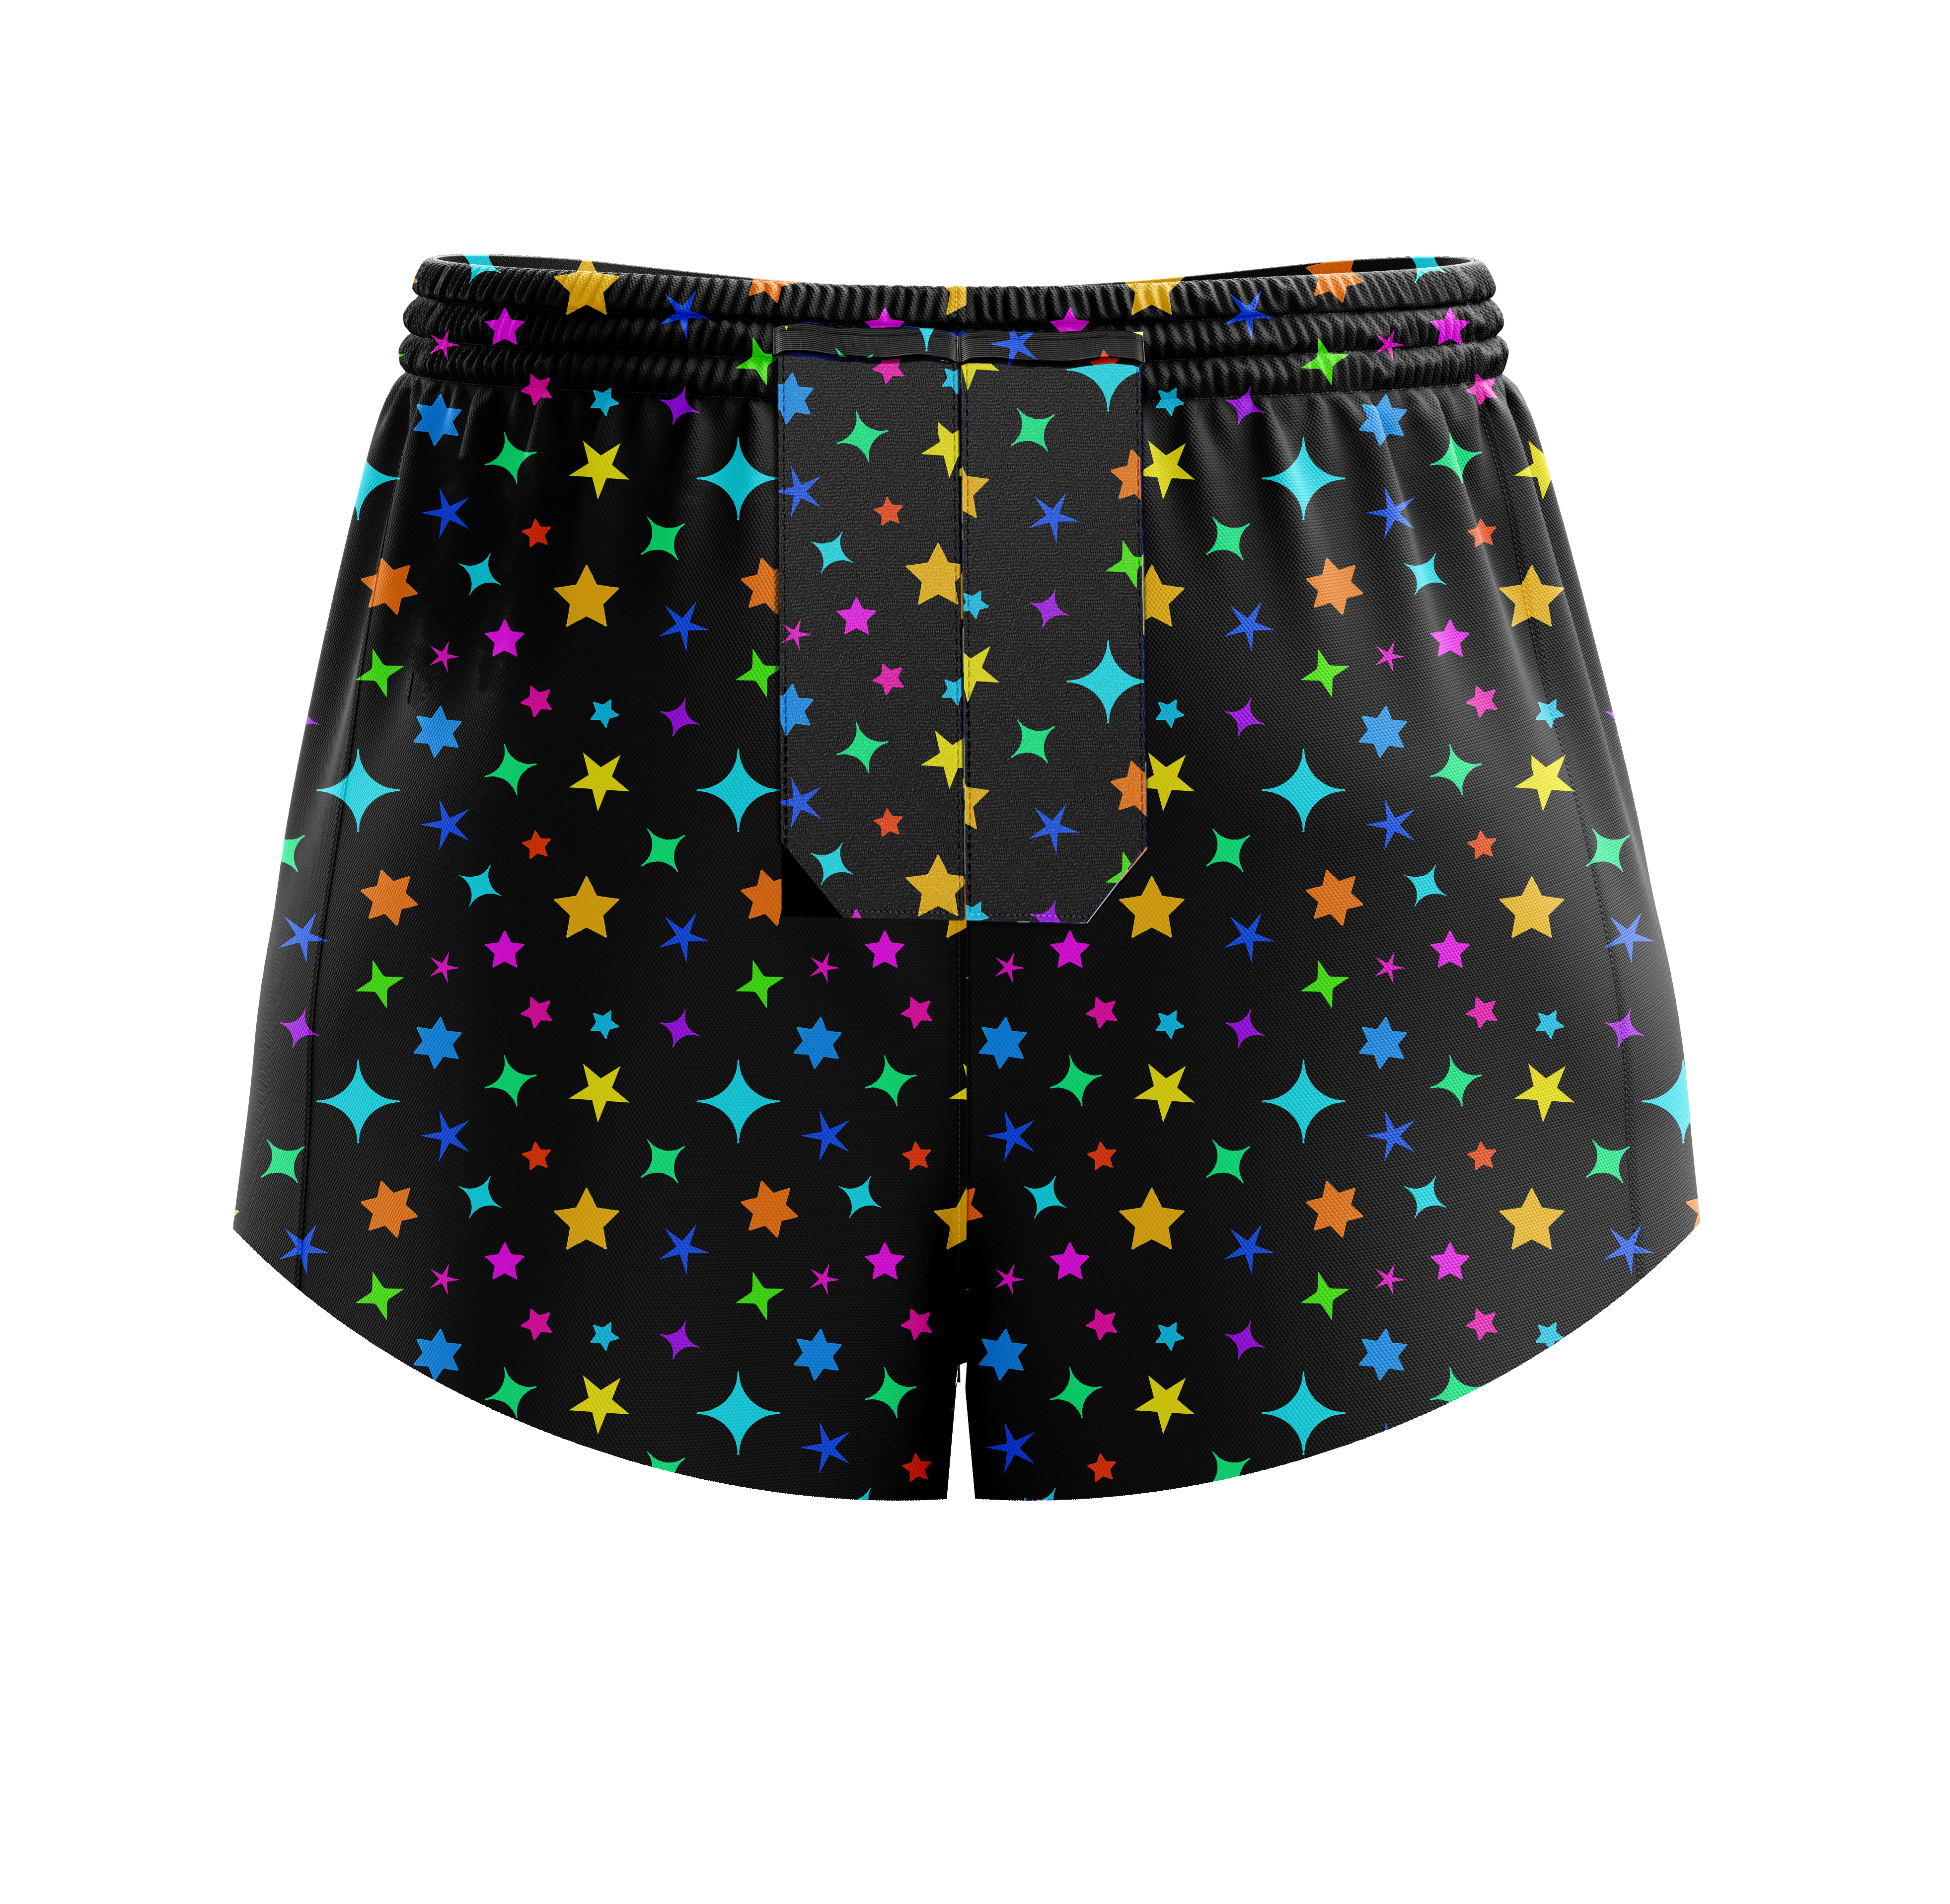 ''Stars in your eyes'' racer shorts